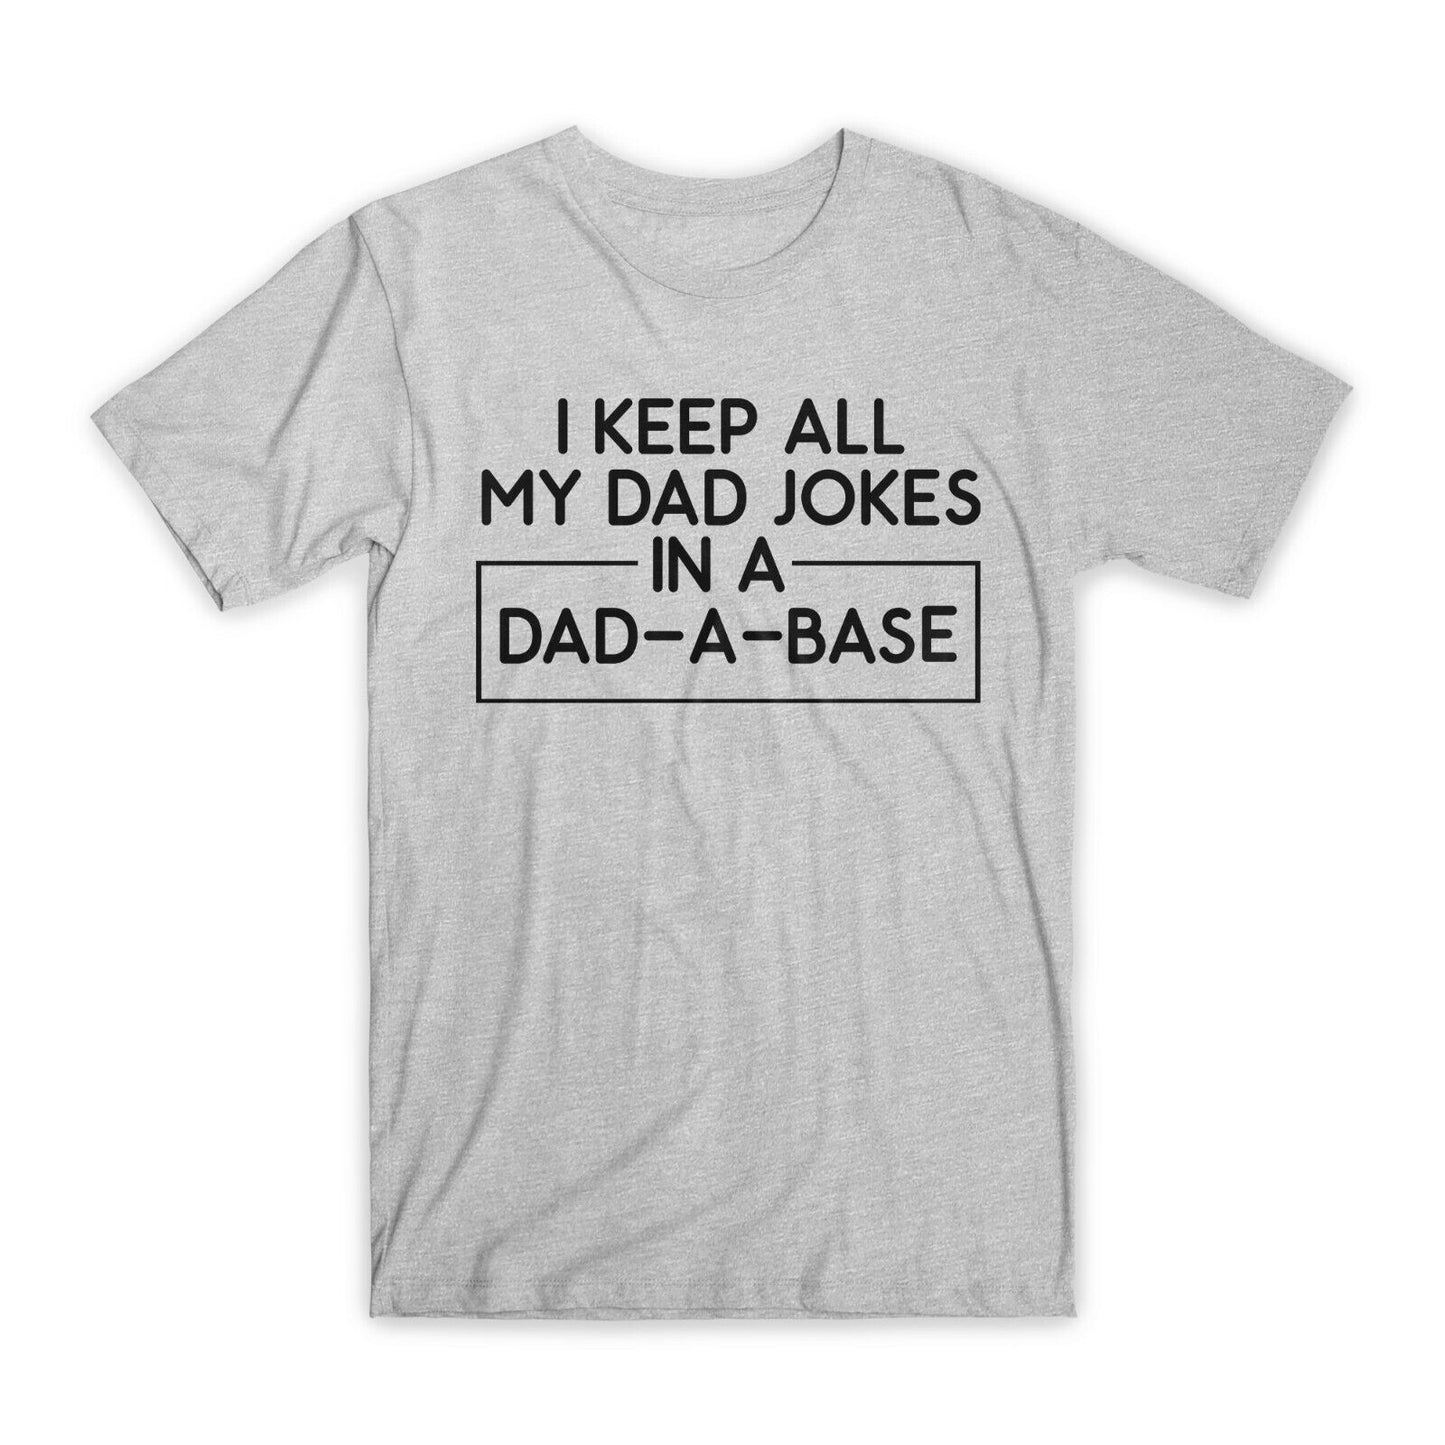 I Keep All My Dad Jokes T-Shirt Premium Soft Cotton Crew Neck Funny Tee Gift NEW